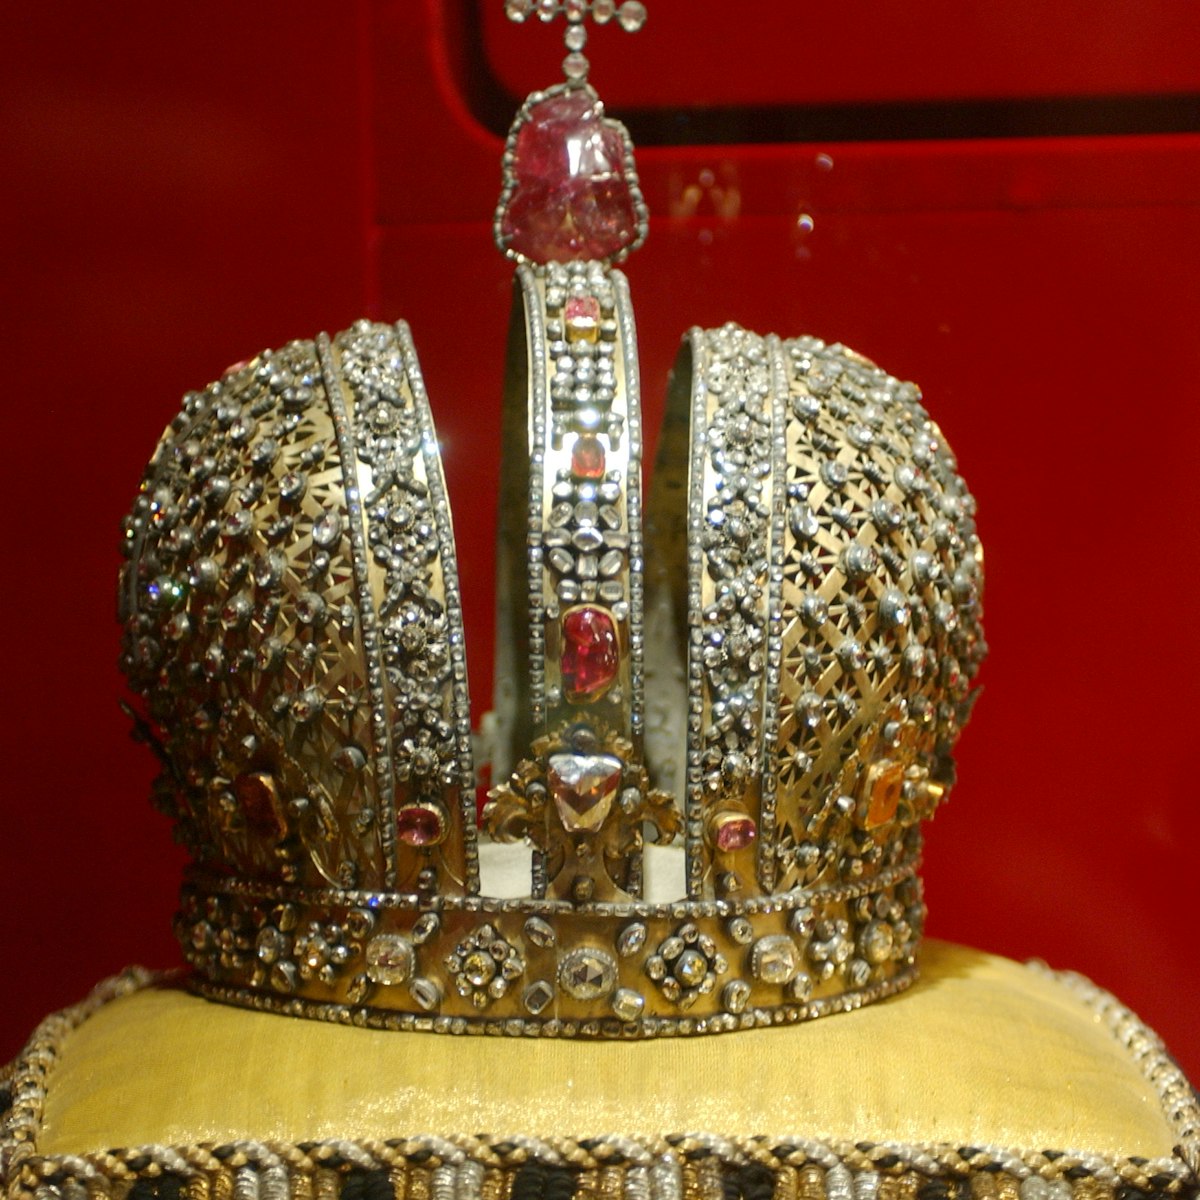 The crown of Tsar Mikhail Fyodorovich in the Armoury in the Kremlin, Moscow. 21/06/2003. (Photo by Jeff Overs/BBC News & Current Affairs via Getty Images)